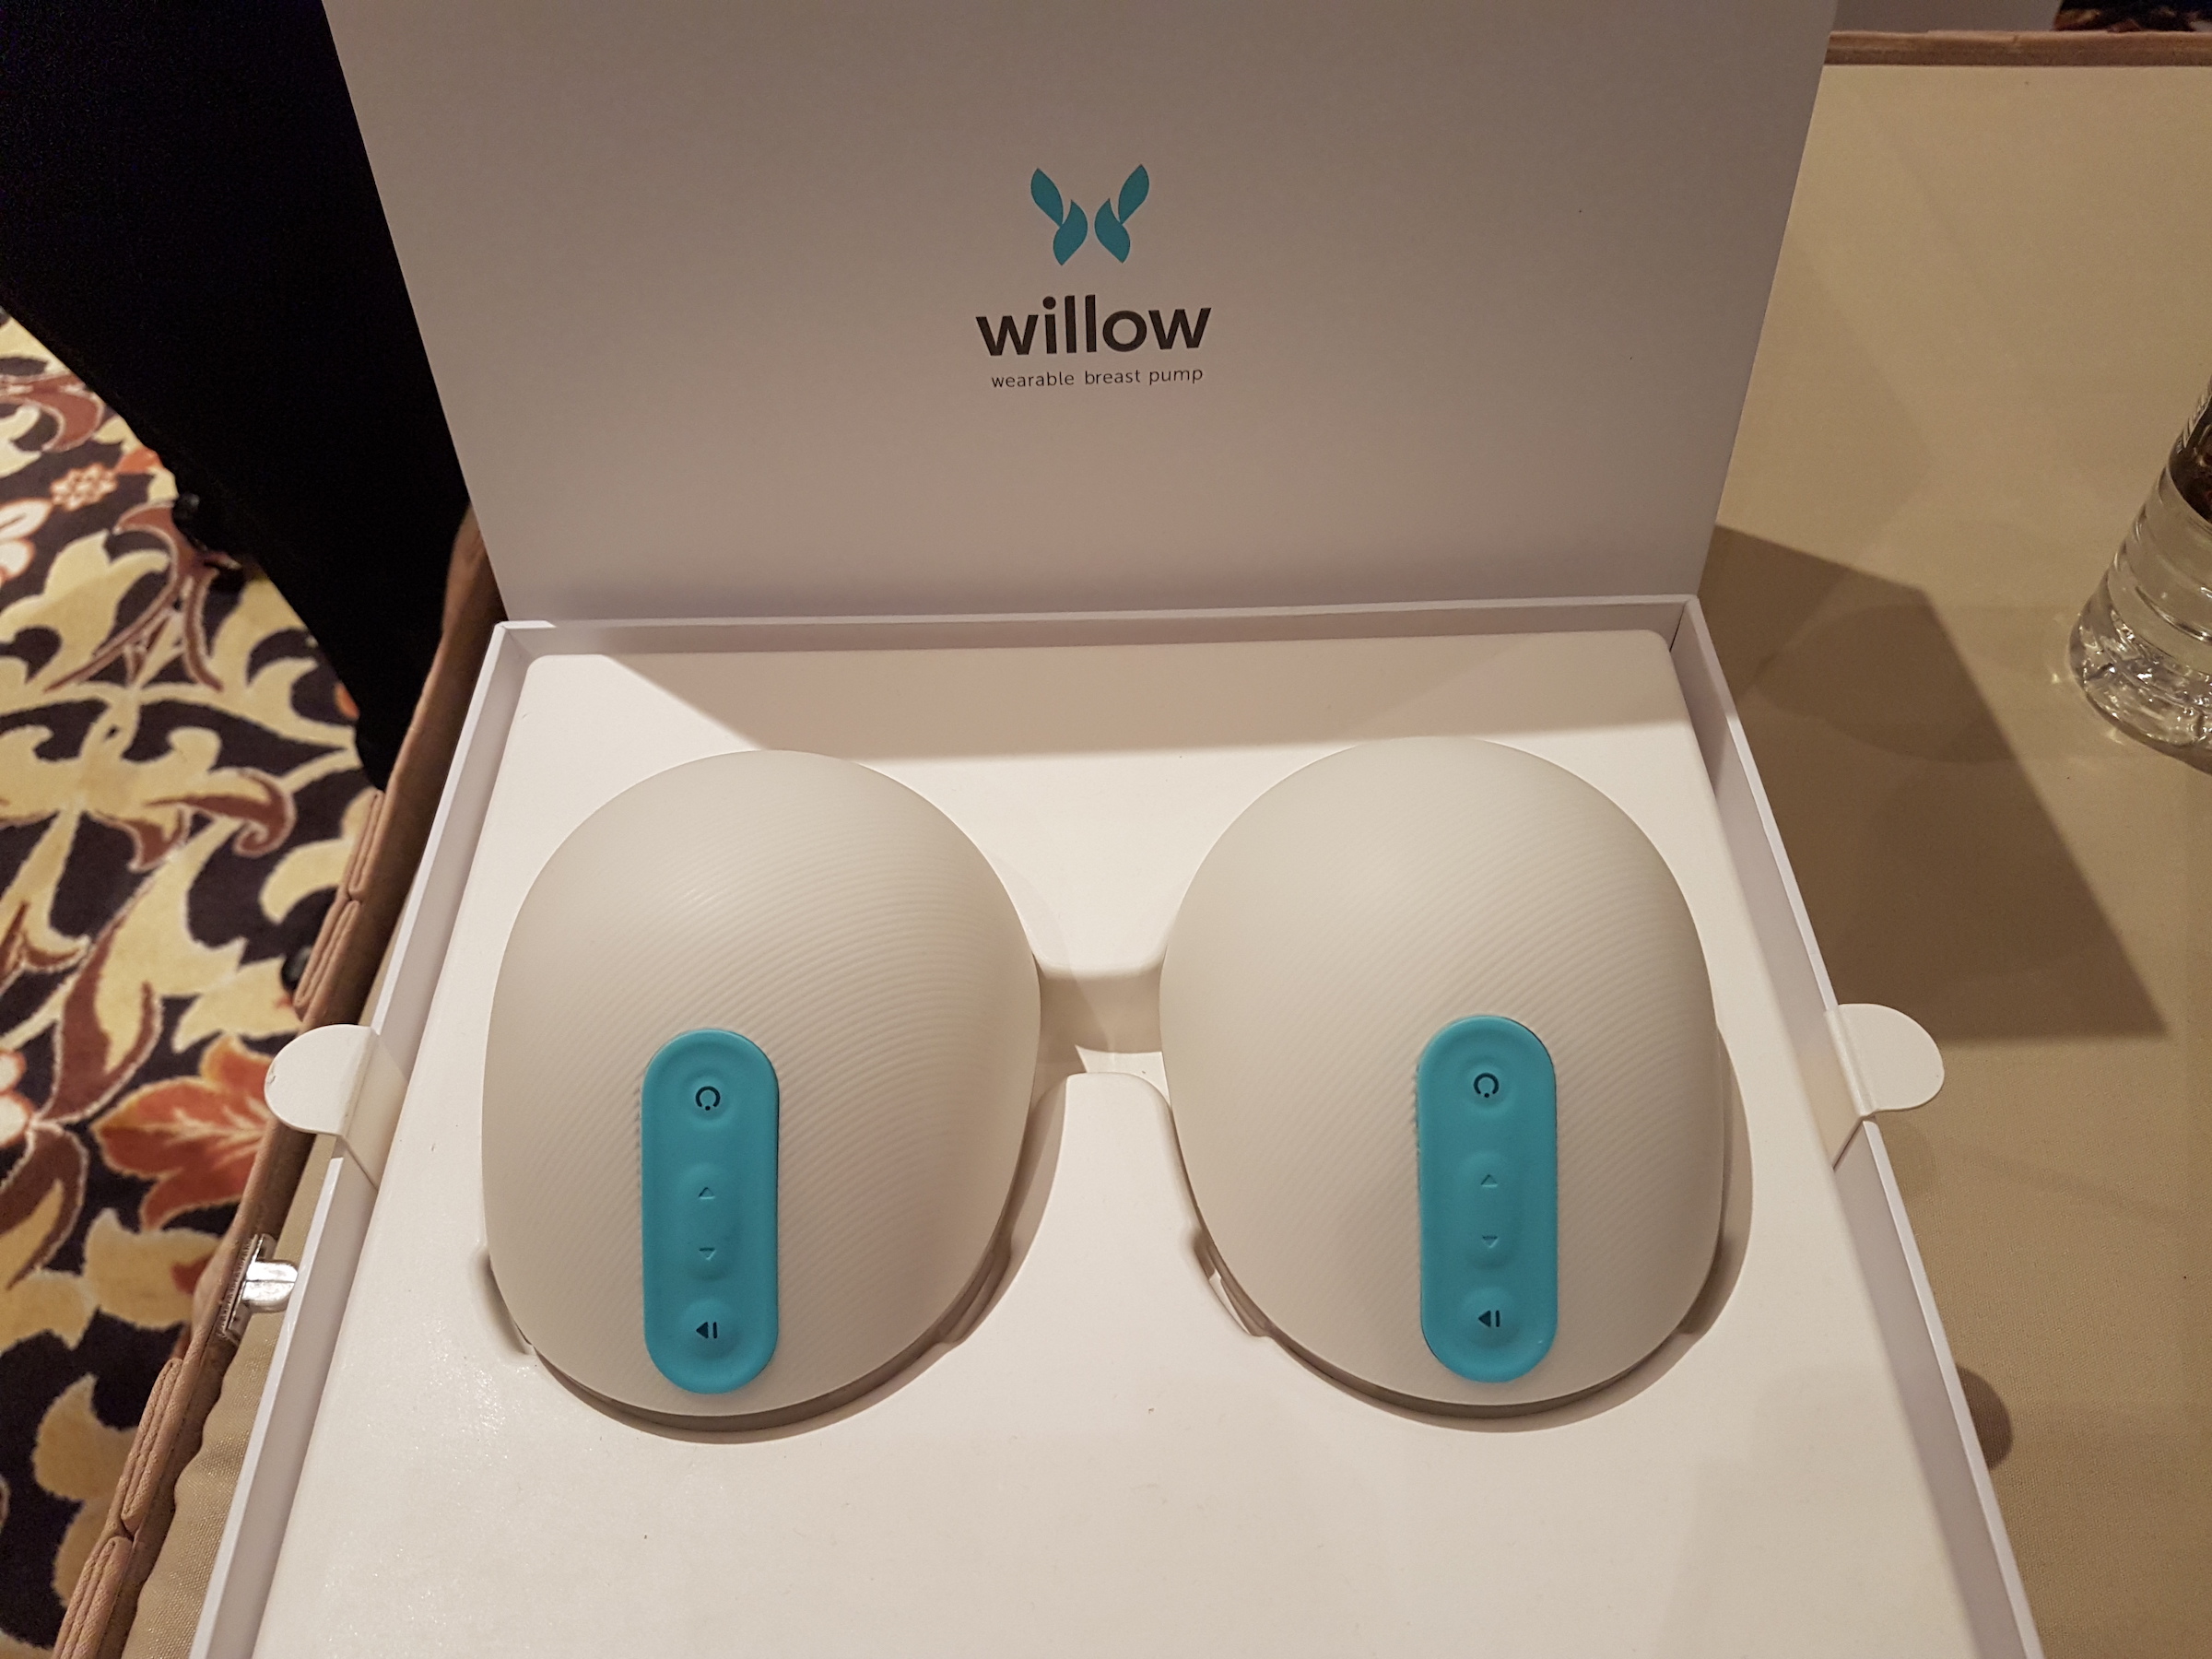 Willow wearable breast pump review: ​Willow breast pump is the